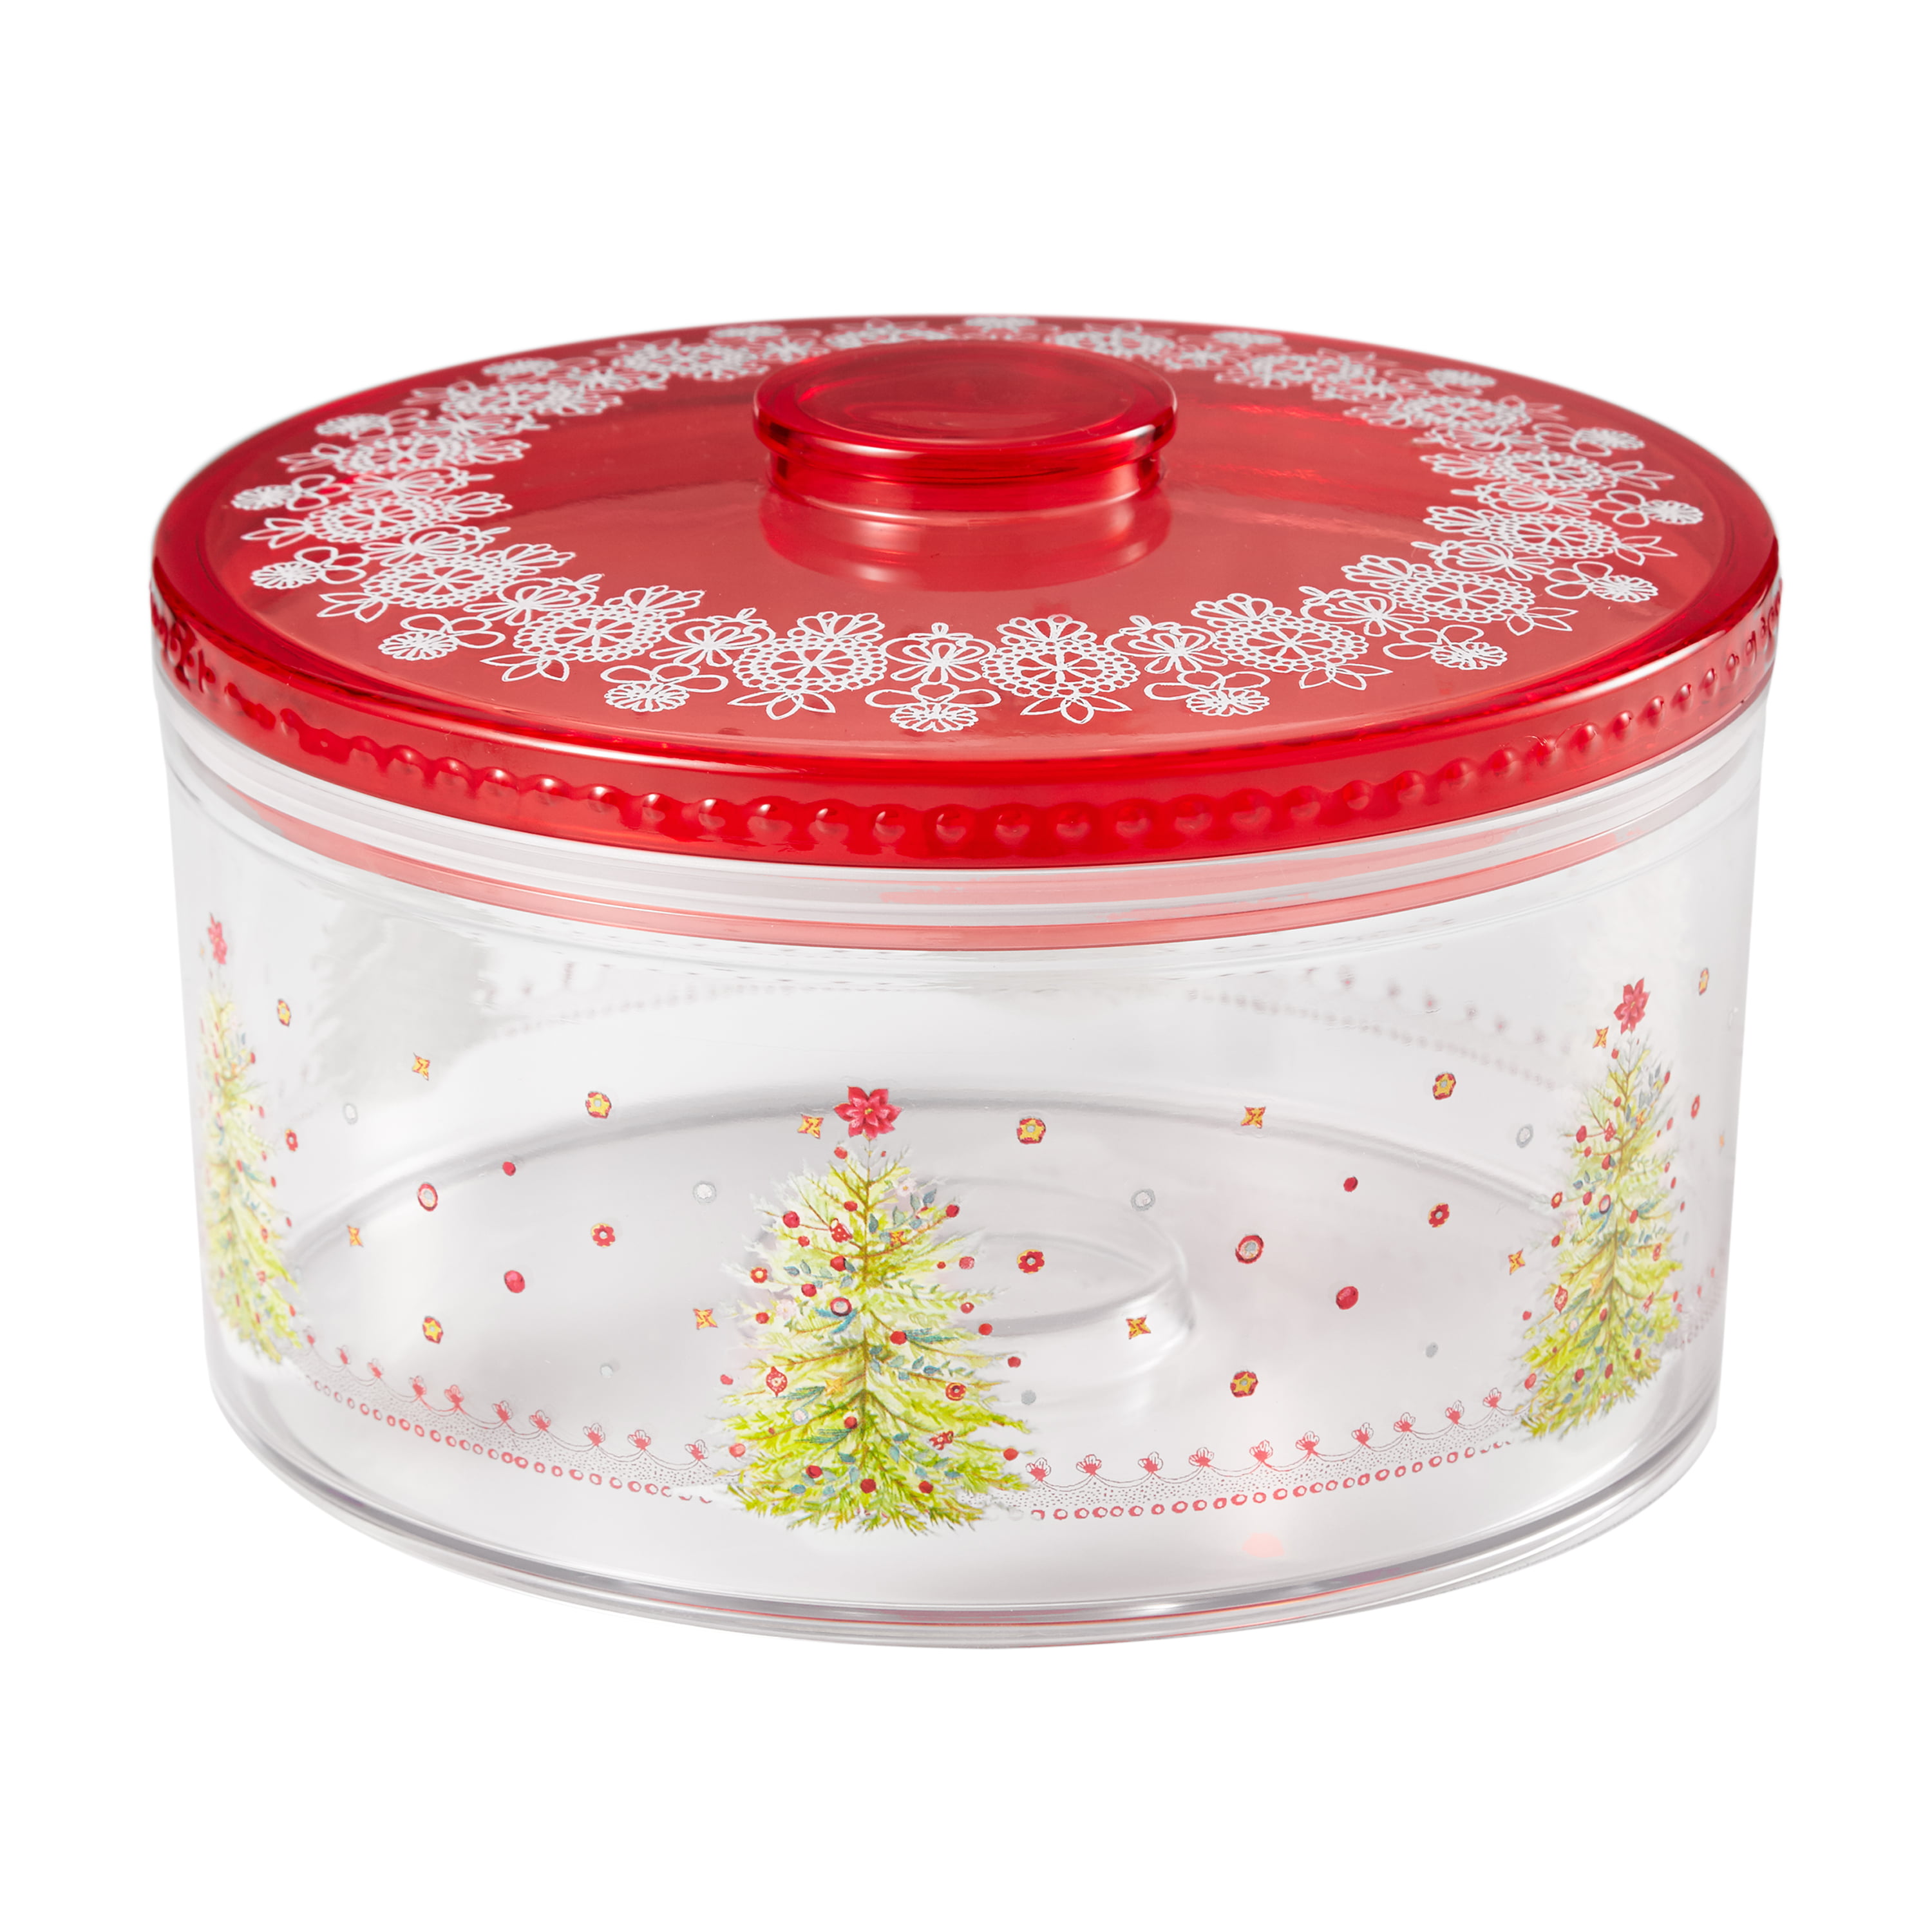 The Pioneer Woman Holiday Cheer Cookie Container - Walmart.com - Walmart.com